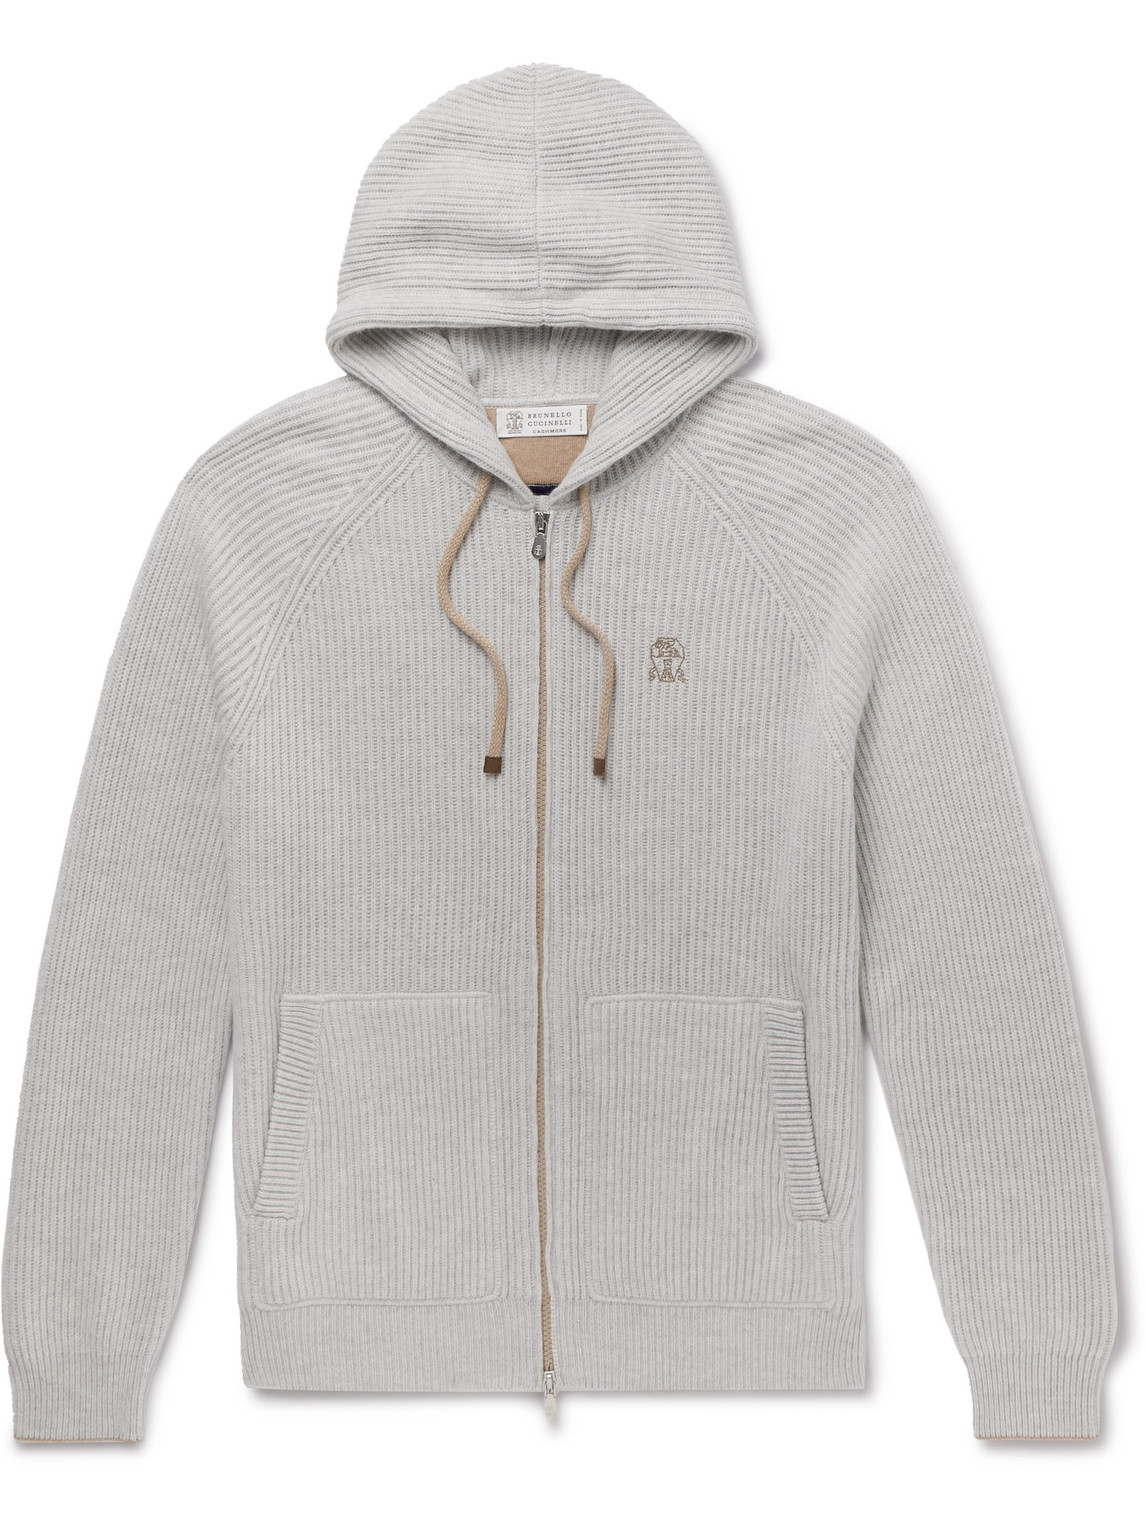 BRUNELLO CUCINELLI LOGO-EMBROIDERED RIBBED-KNIT CASHMERE ZIP-UP HOODIE